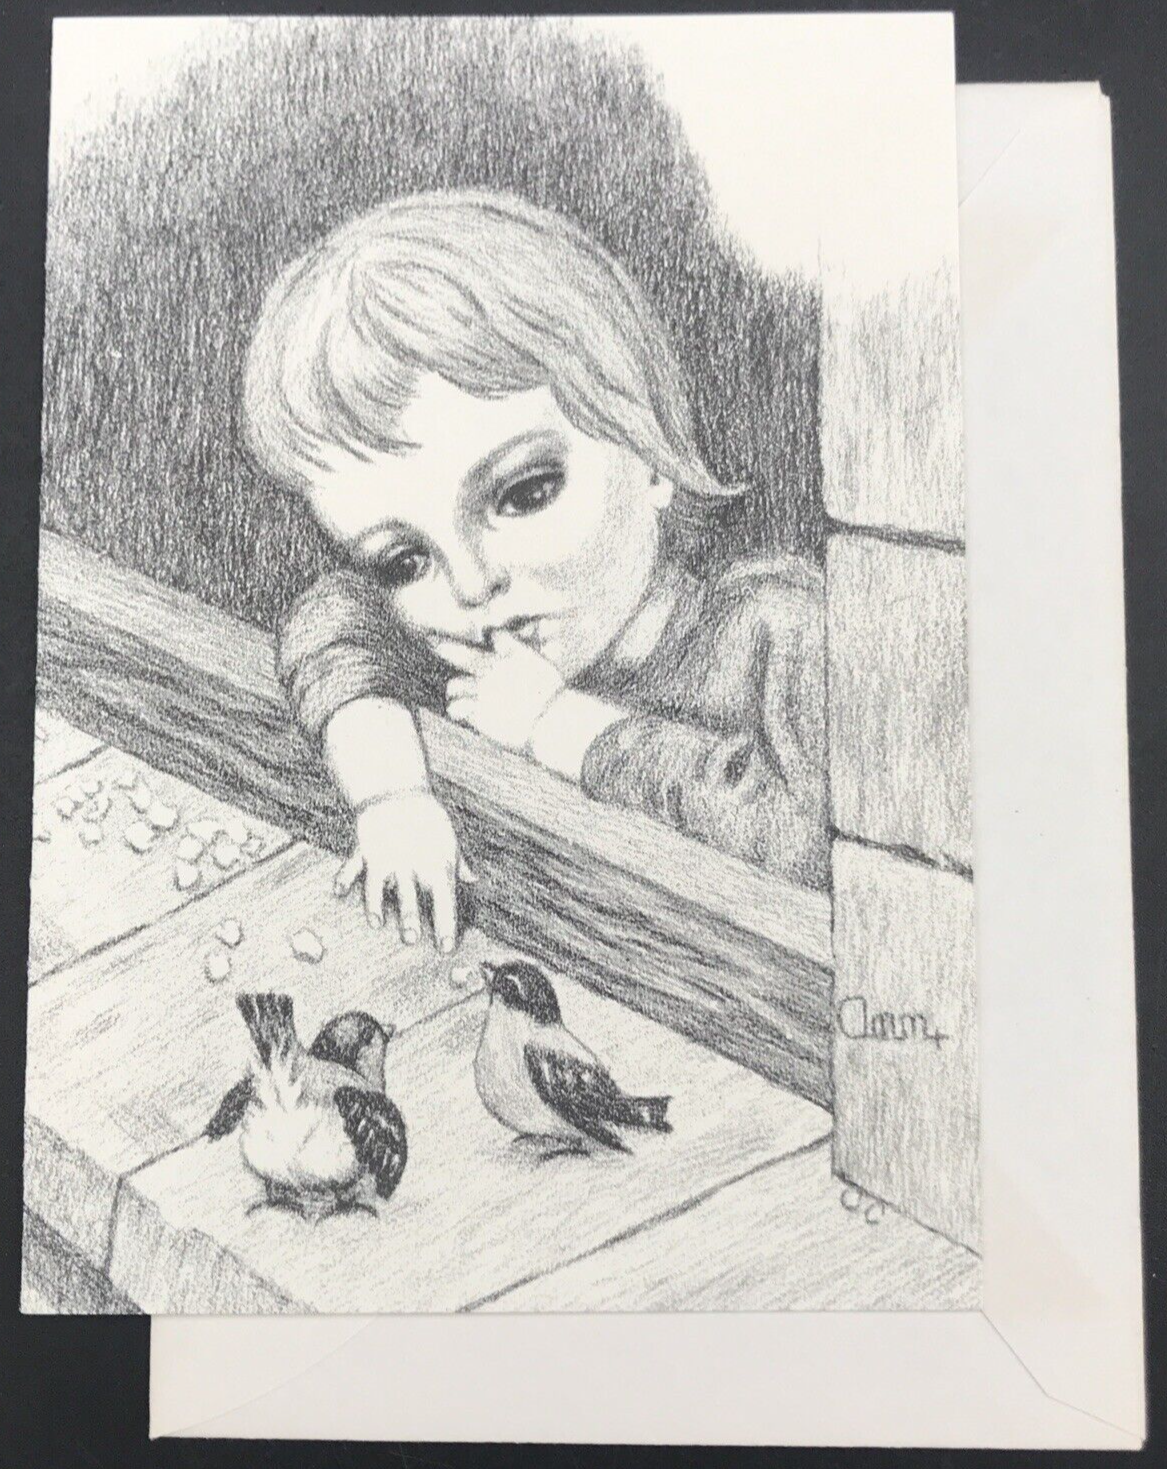 Primary image for 1973 Ann Adams Sad Child Feeding Birds Greeting Note Card Pencil Drawing Print